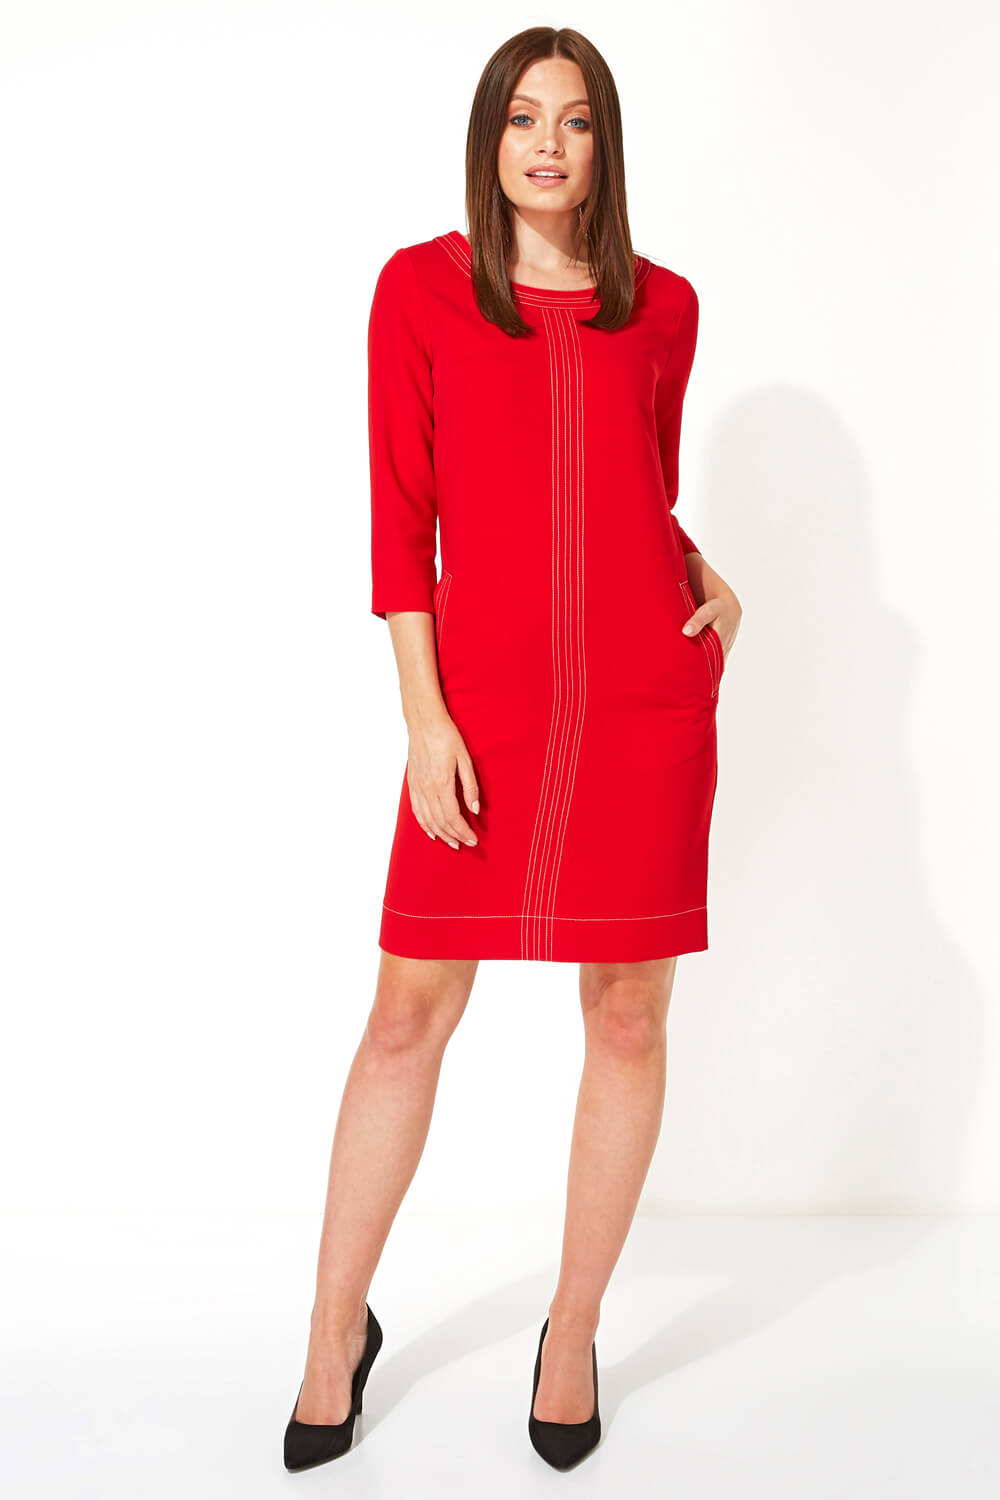 Red 3/4 Sleeve Top Stitch Shift Dress, Image 2 of 5